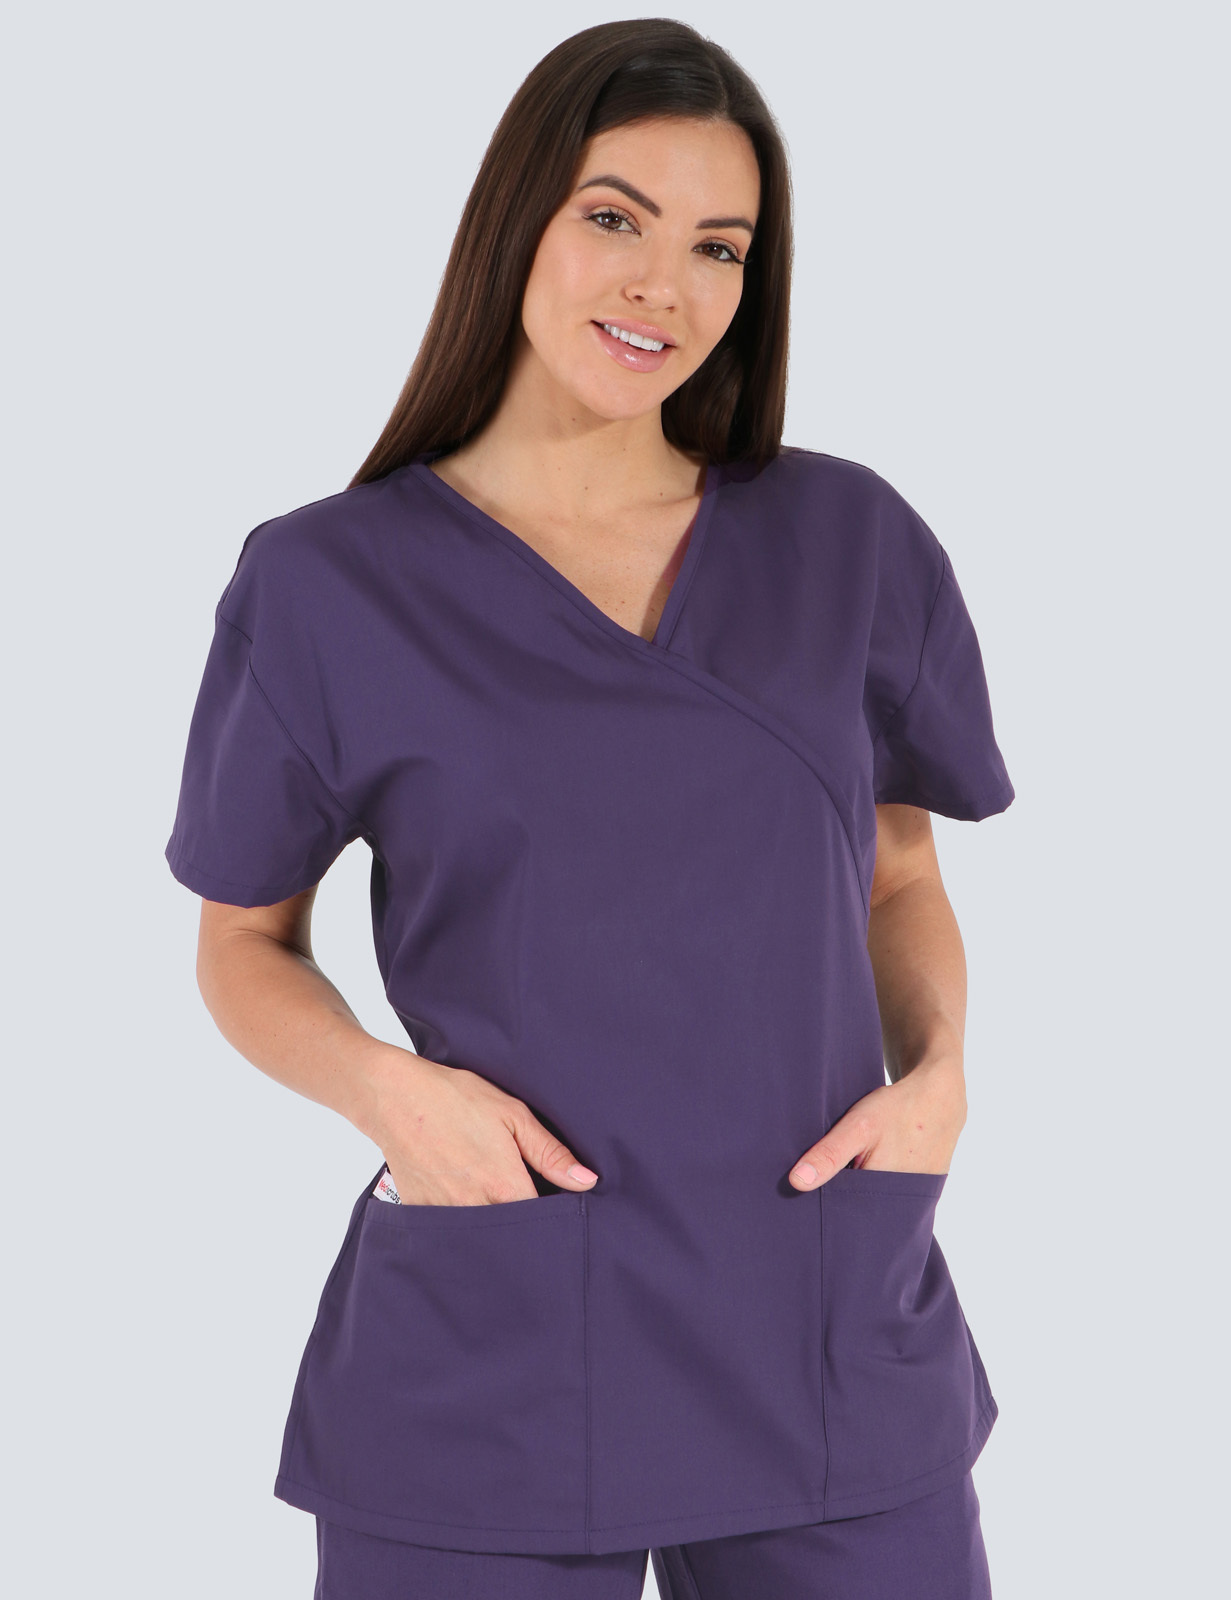 The Park - Centre for Mental Health - Pharmacy Top only Bundle (Mock-Wrap Top incl Logo)